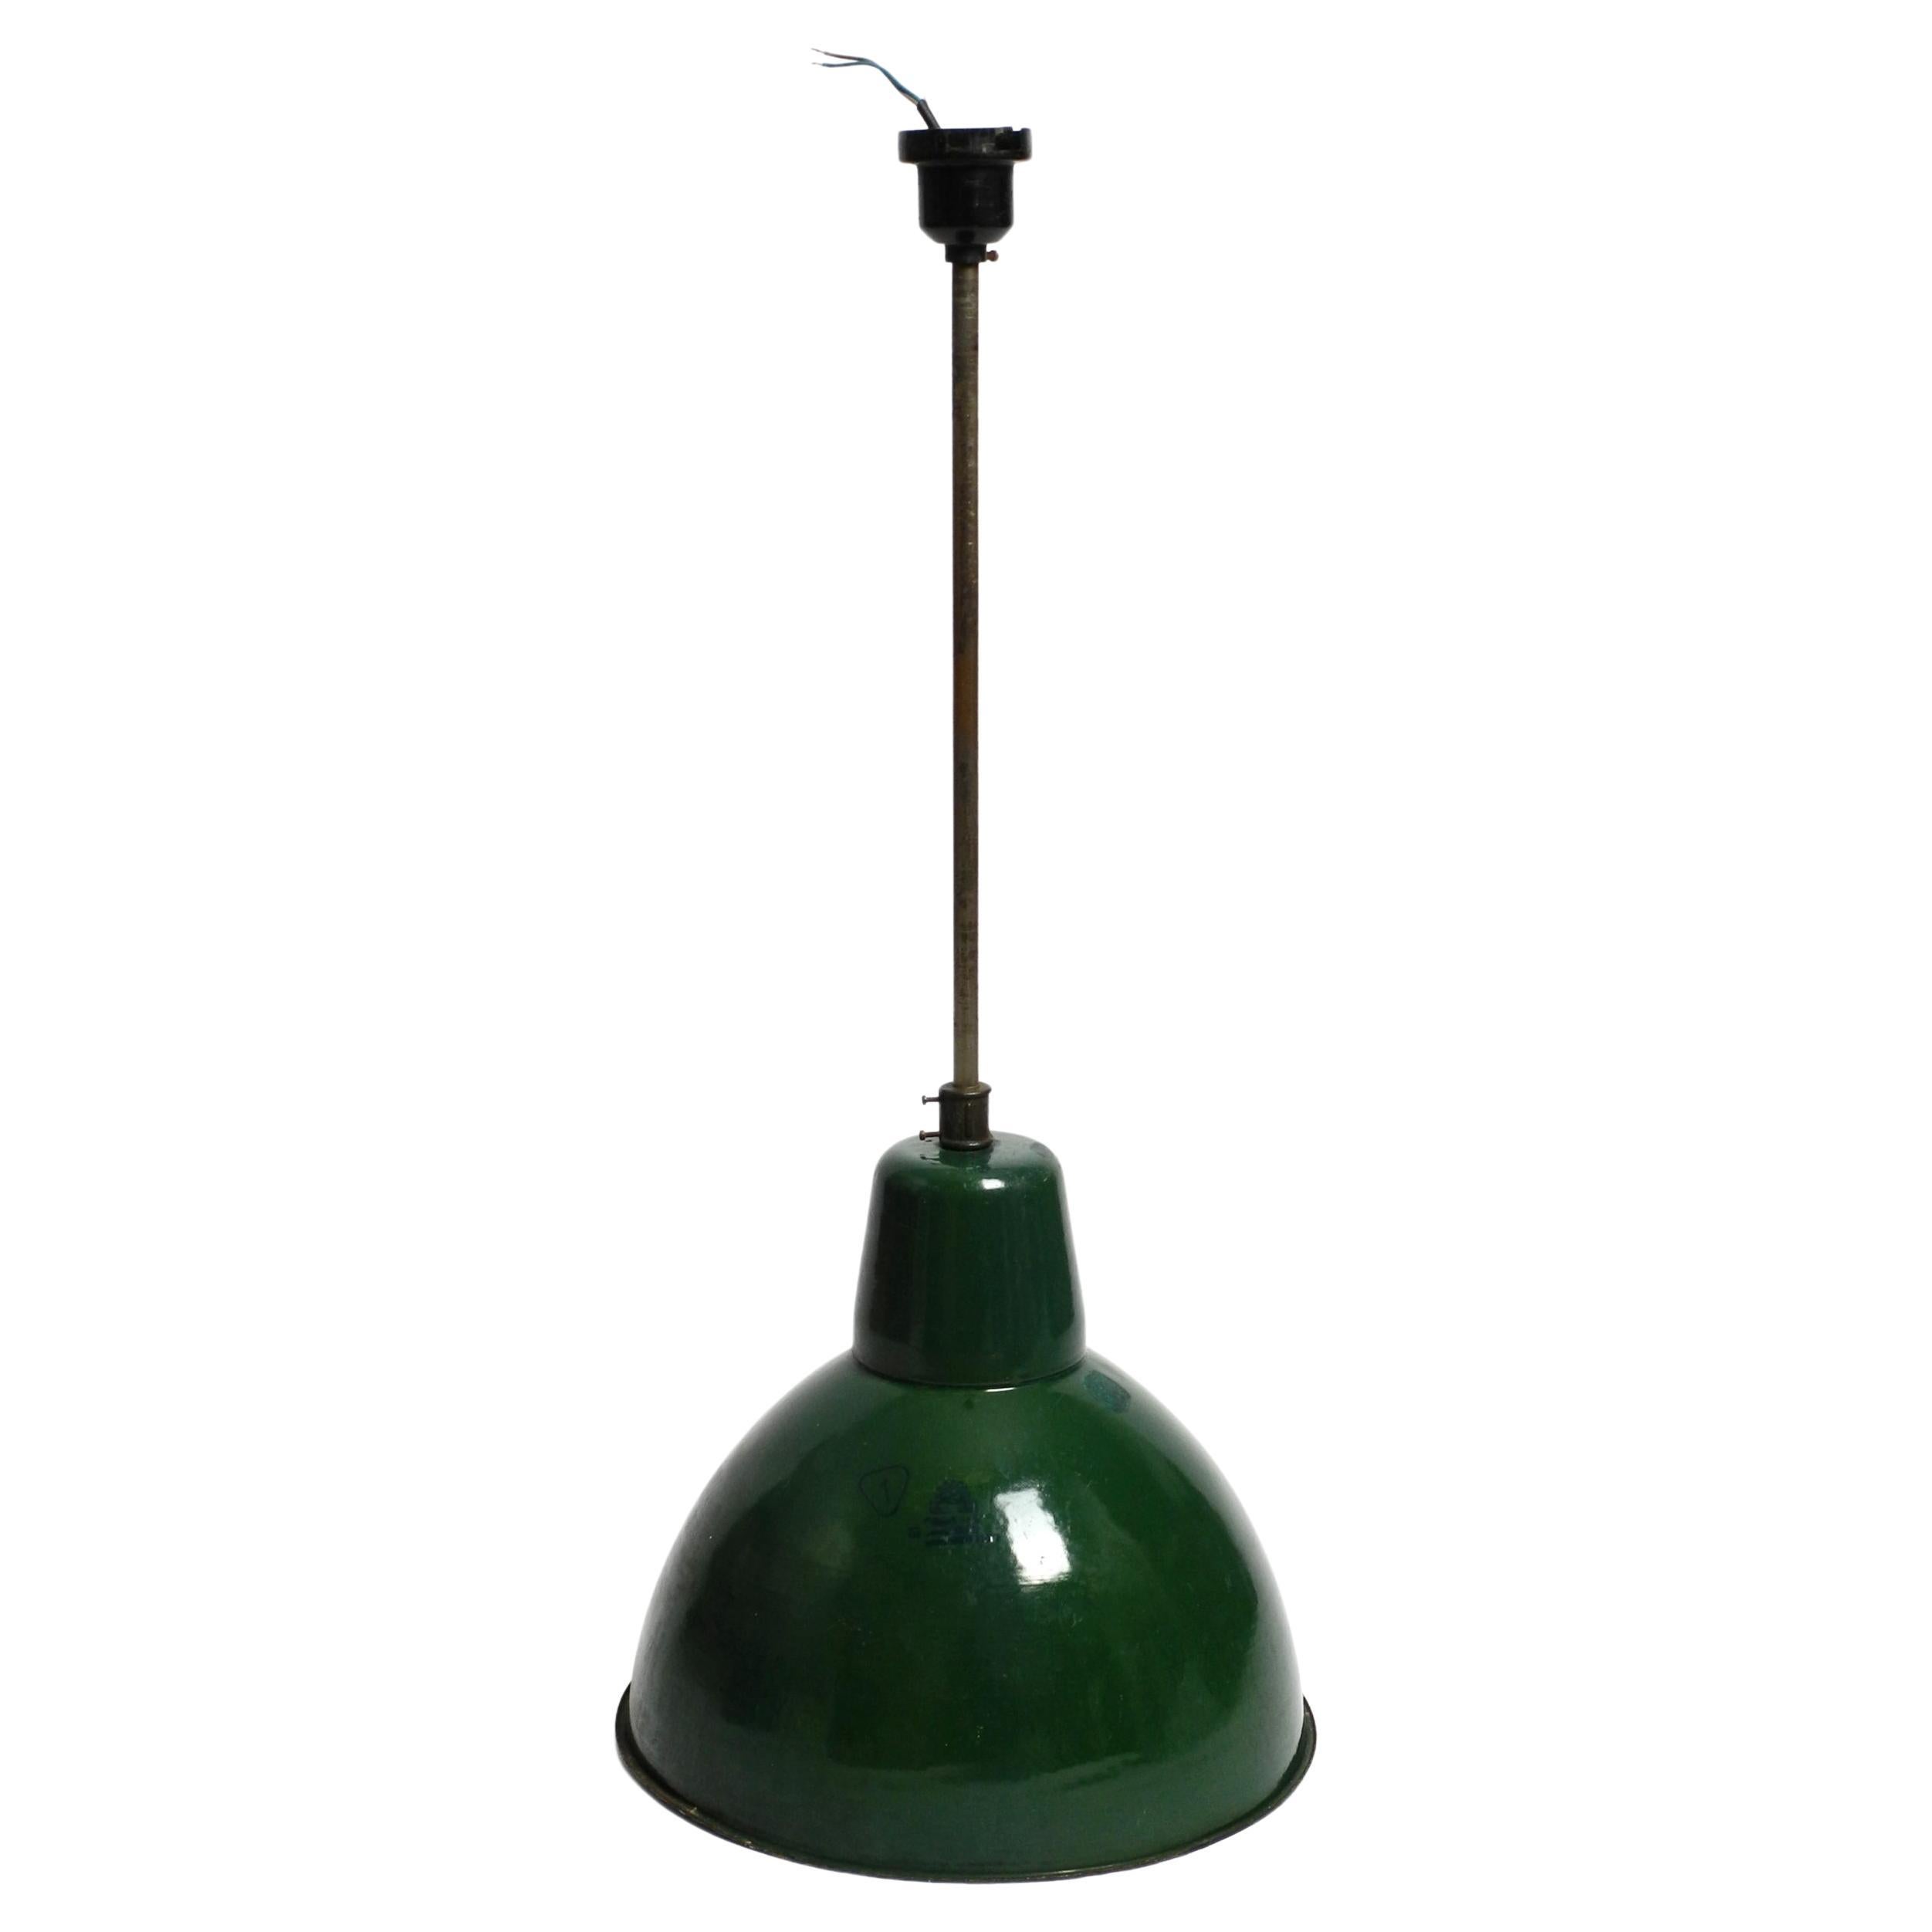 Large 50s Industrial Enameled Factory Lamp from France in the Original Colour